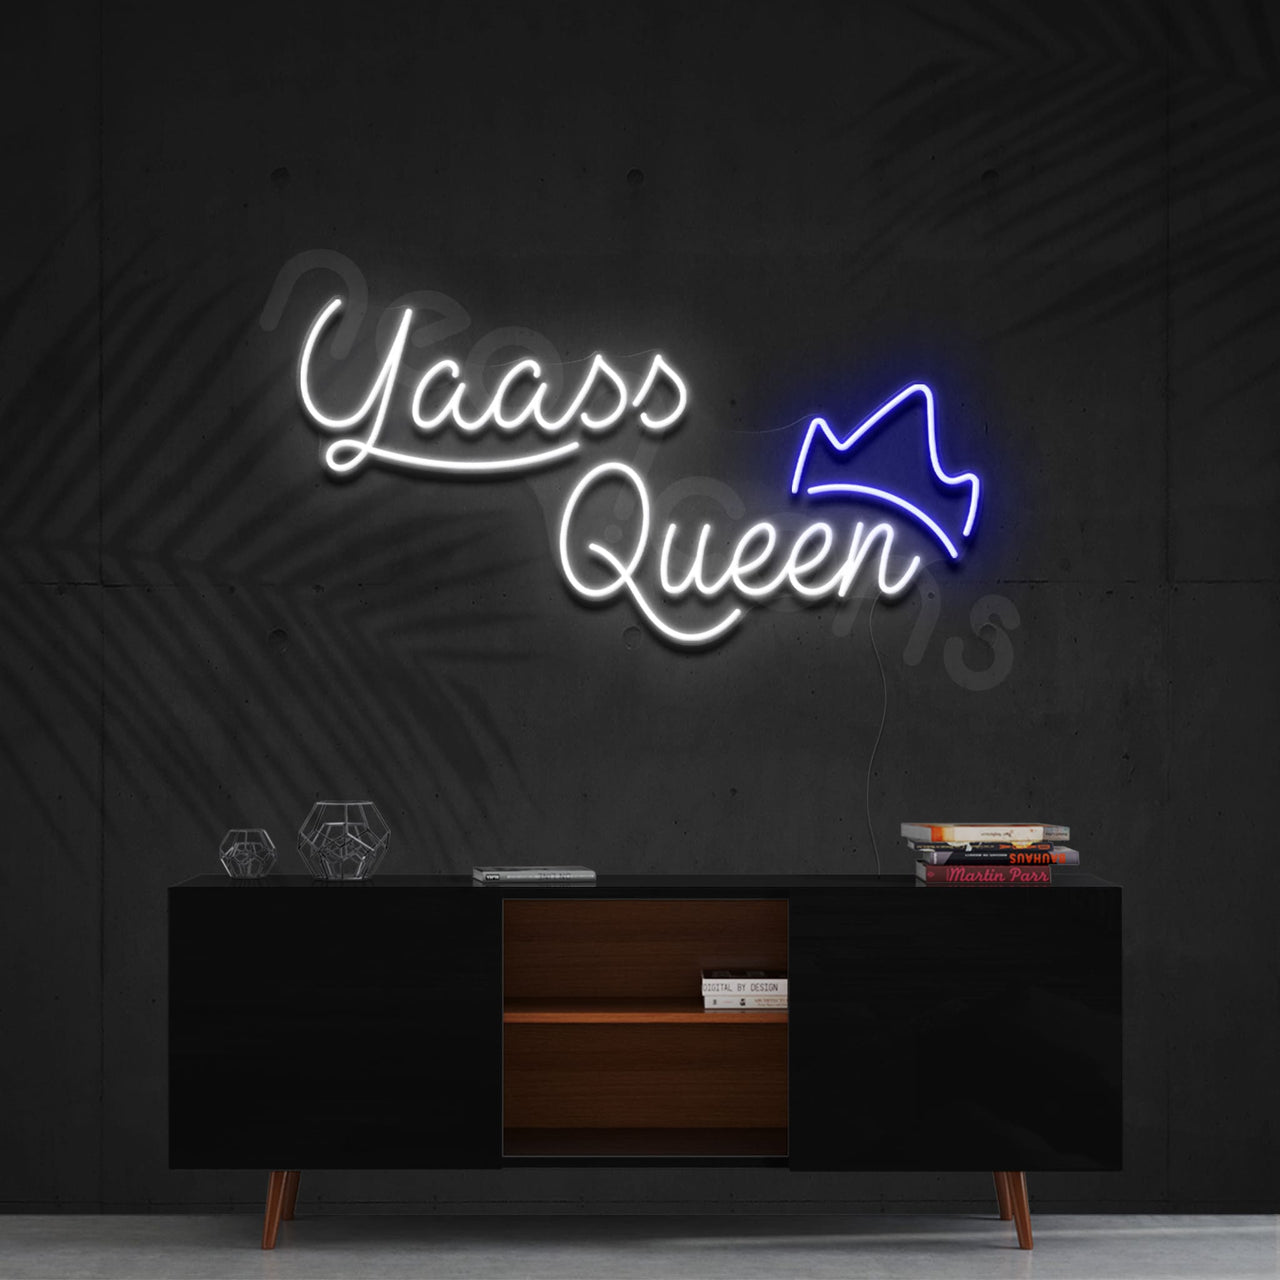 "Yaass Queen" Neon Sign 60cm (2ft) / Blue / LED by Neon Icons